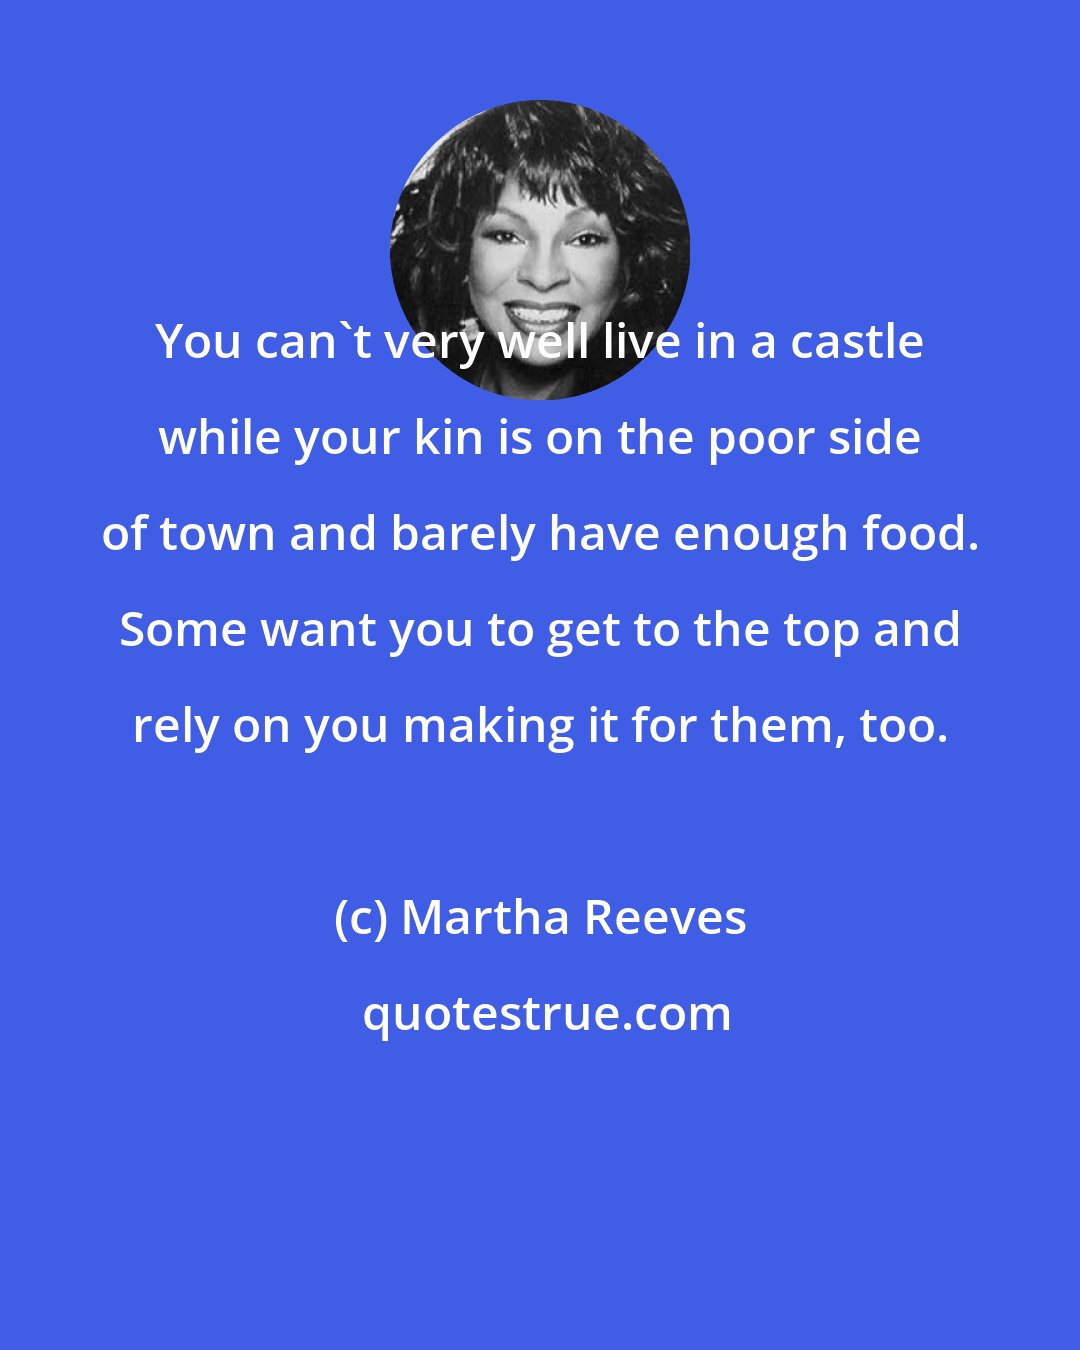 Martha Reeves: You can't very well live in a castle while your kin is on the poor side of town and barely have enough food. Some want you to get to the top and rely on you making it for them, too.